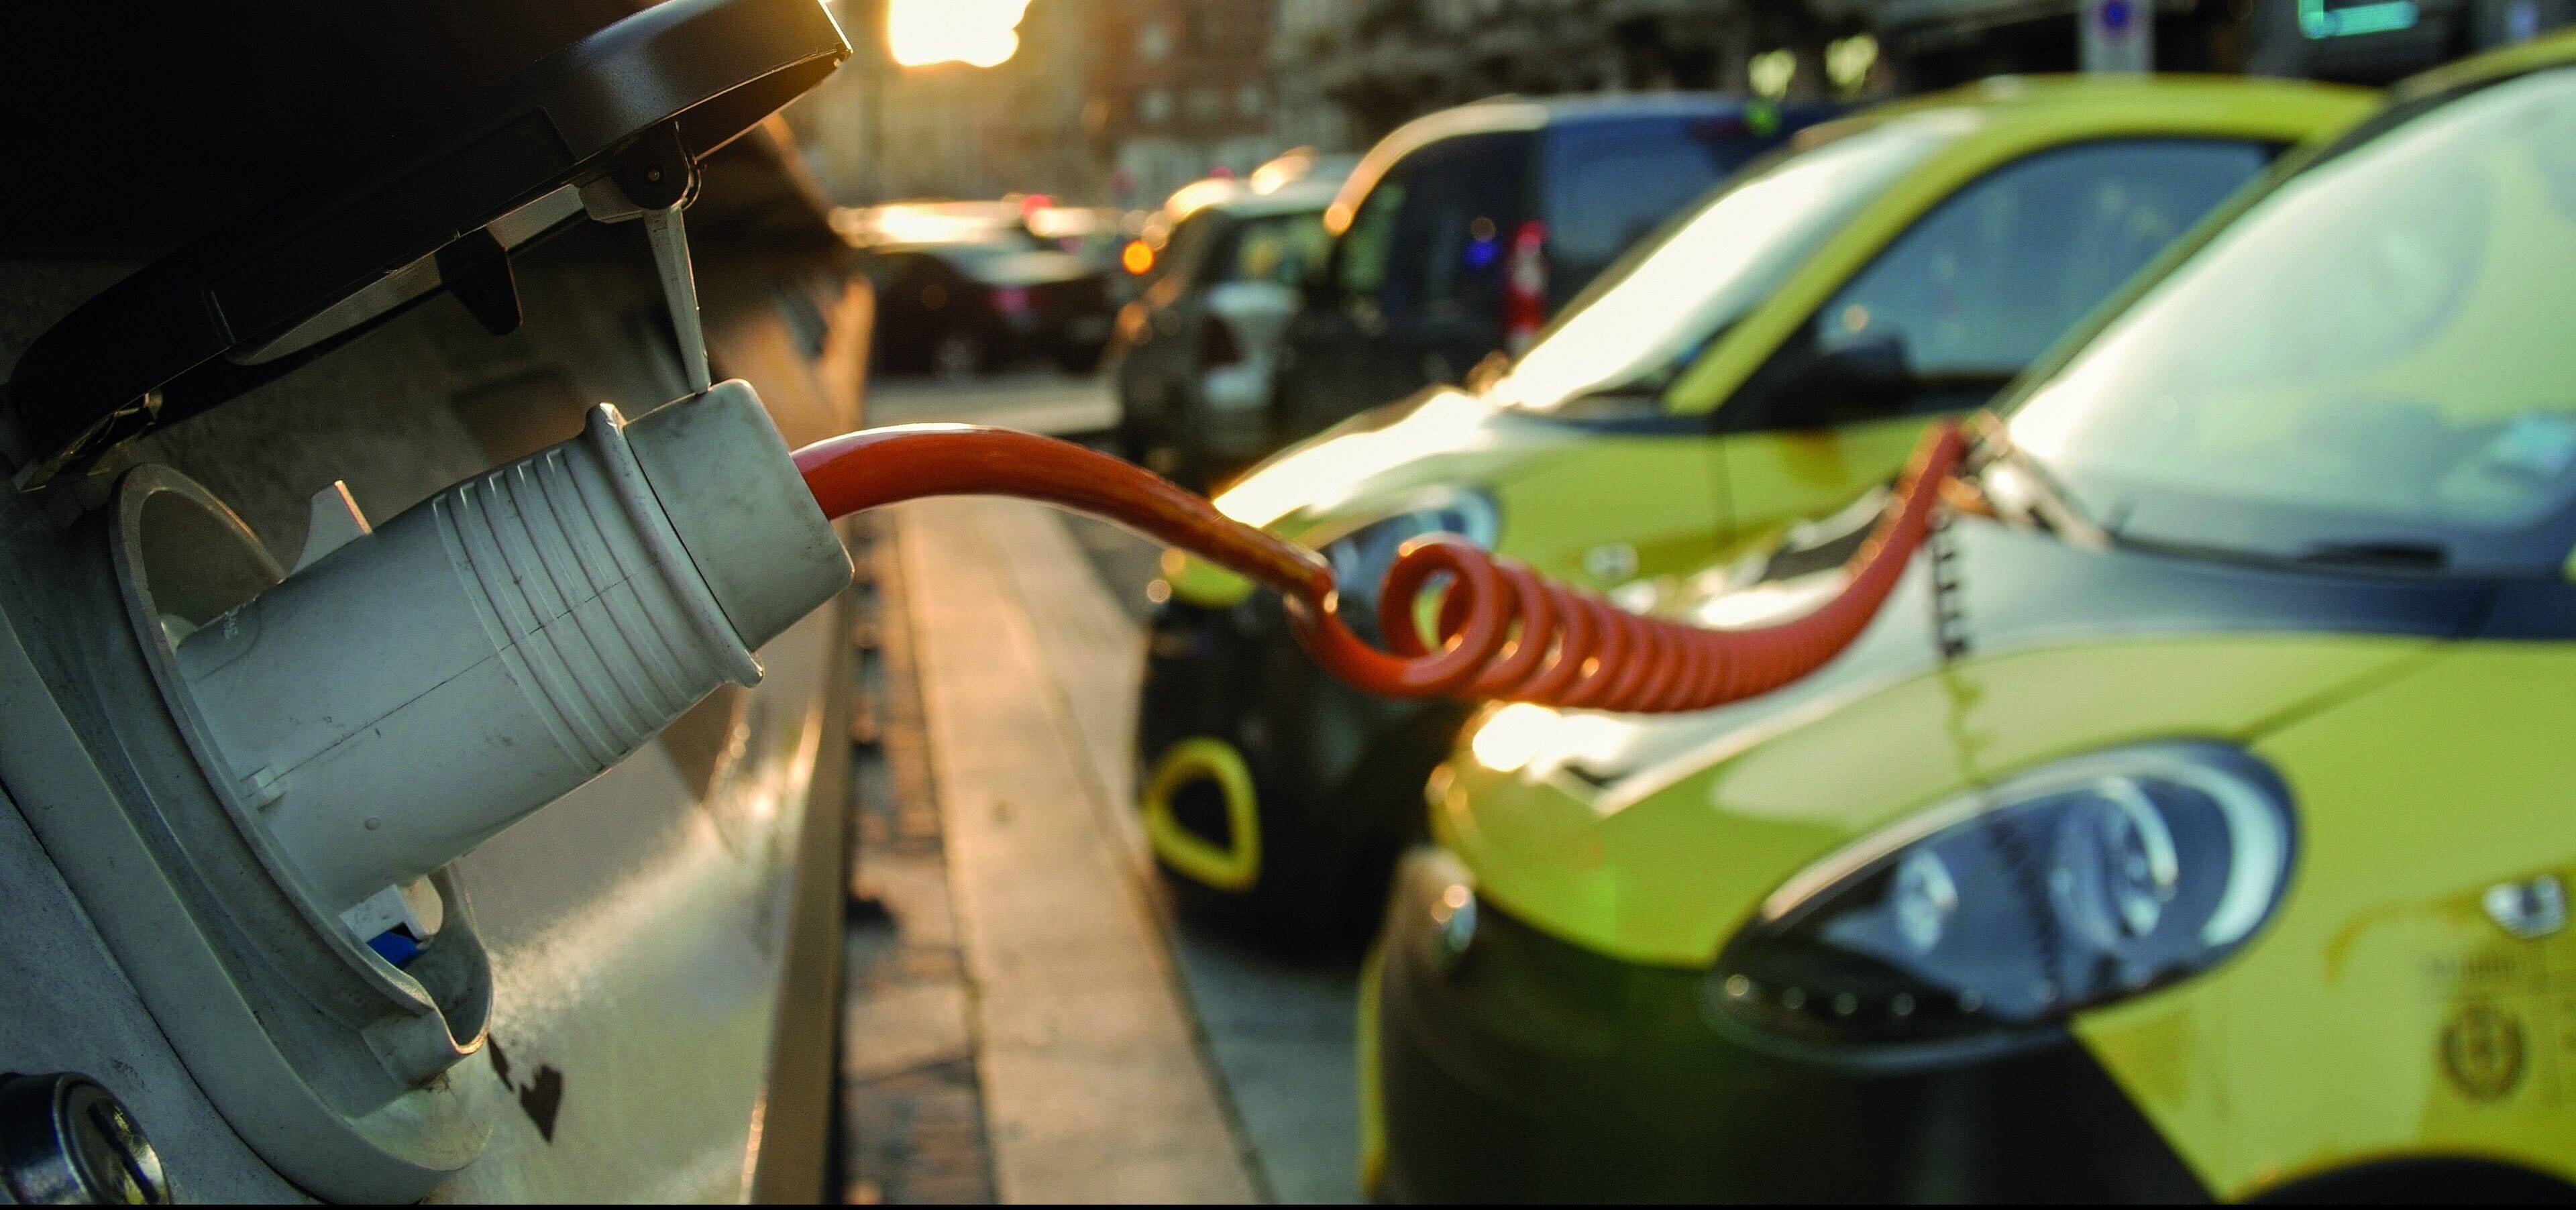 EV charging locations outnumber petrol stations in the UK